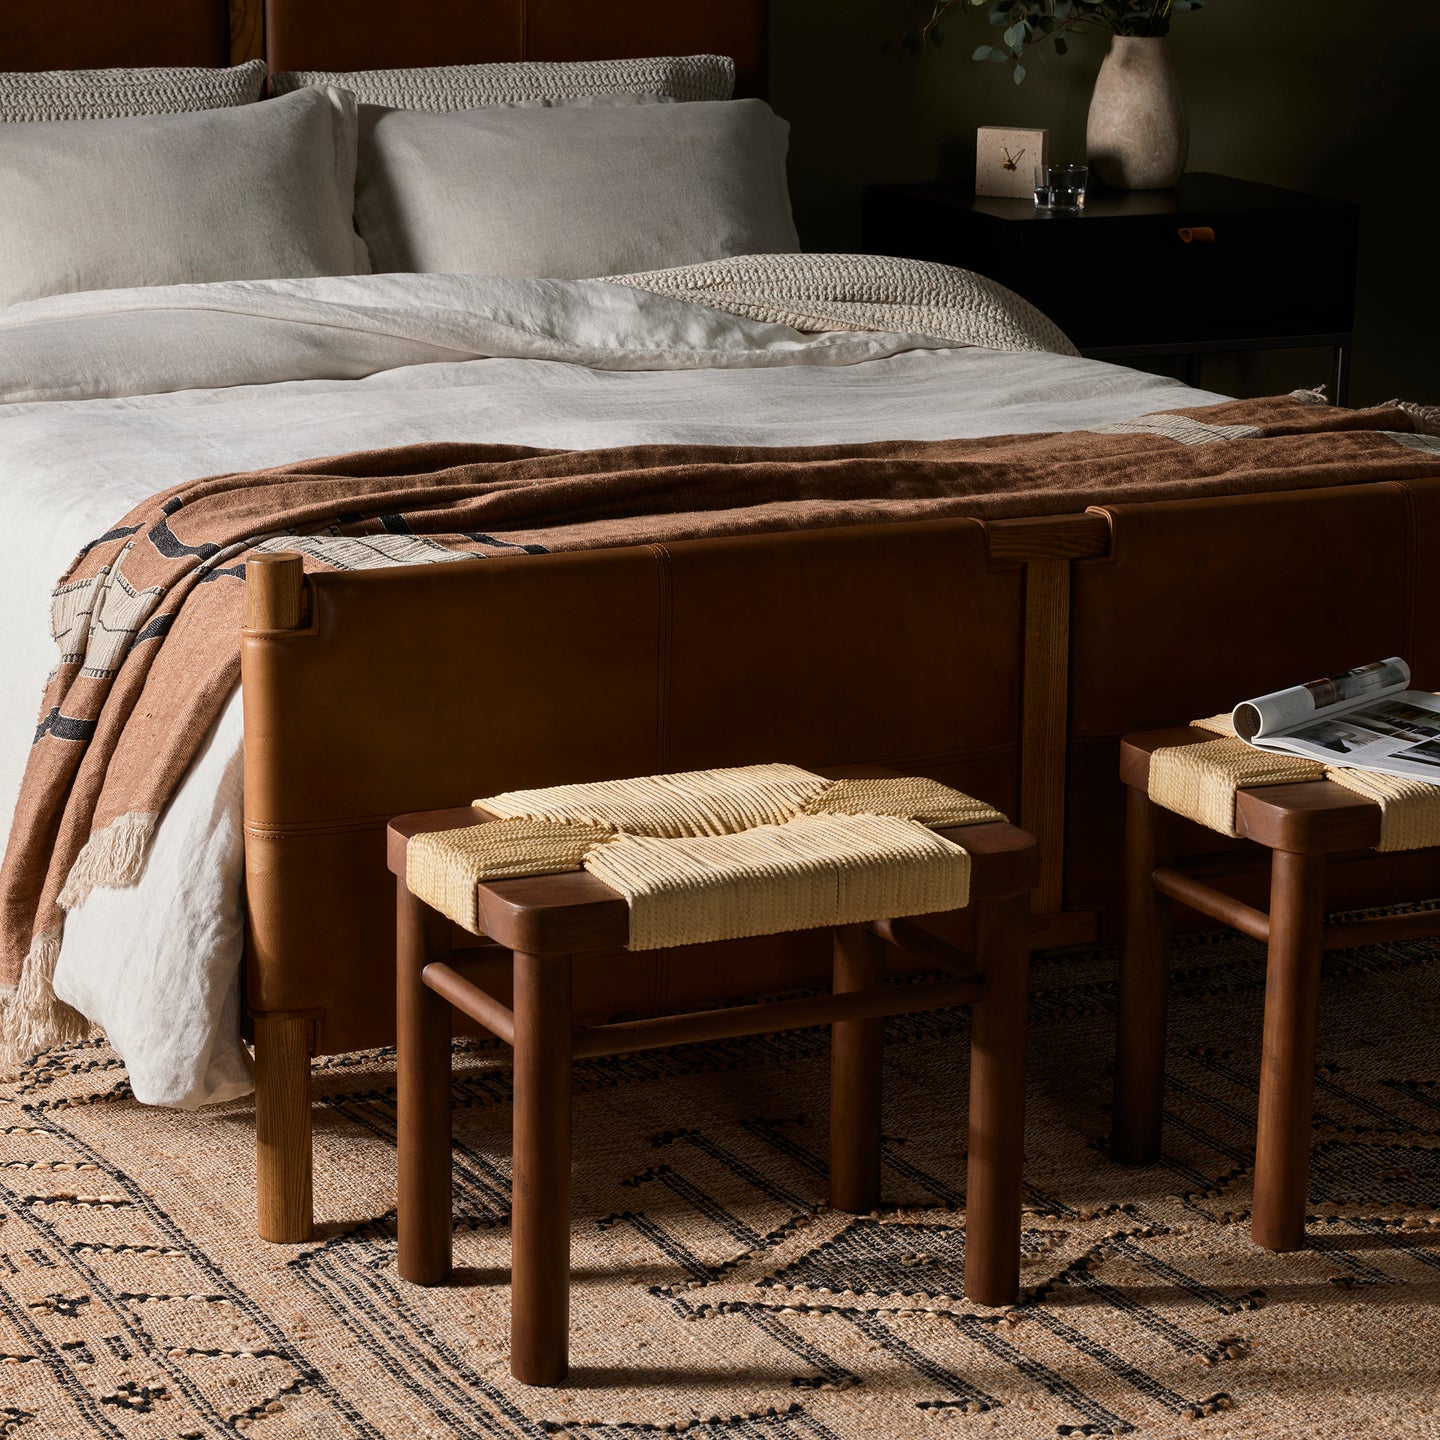 Four Hands Shona Stool in Vintage Cotton in a bedroom at the end of the bed